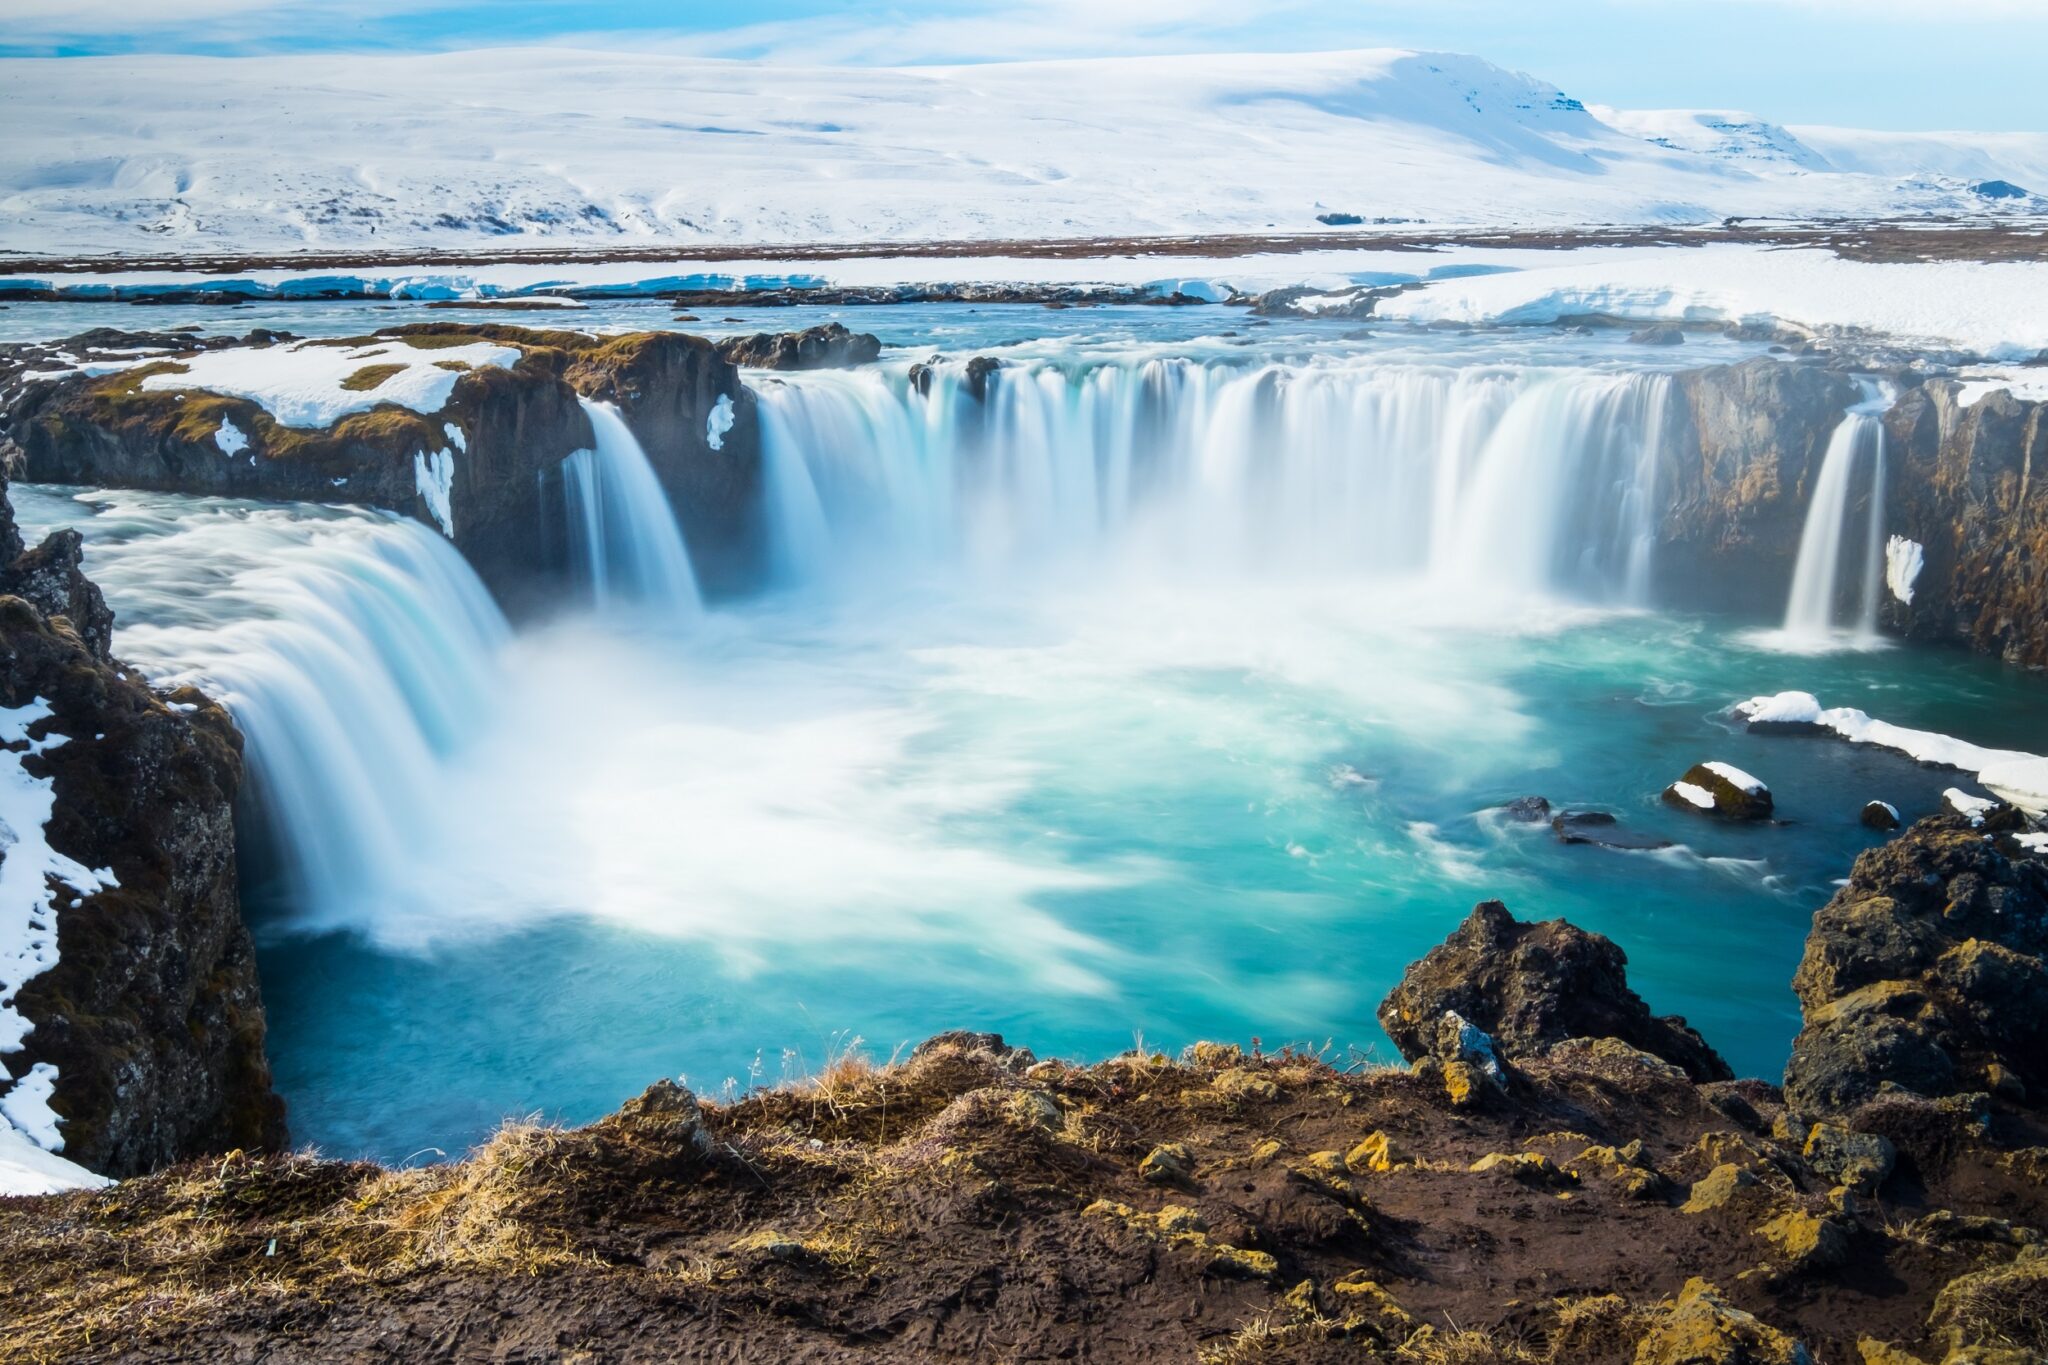 tour packages to iceland from us